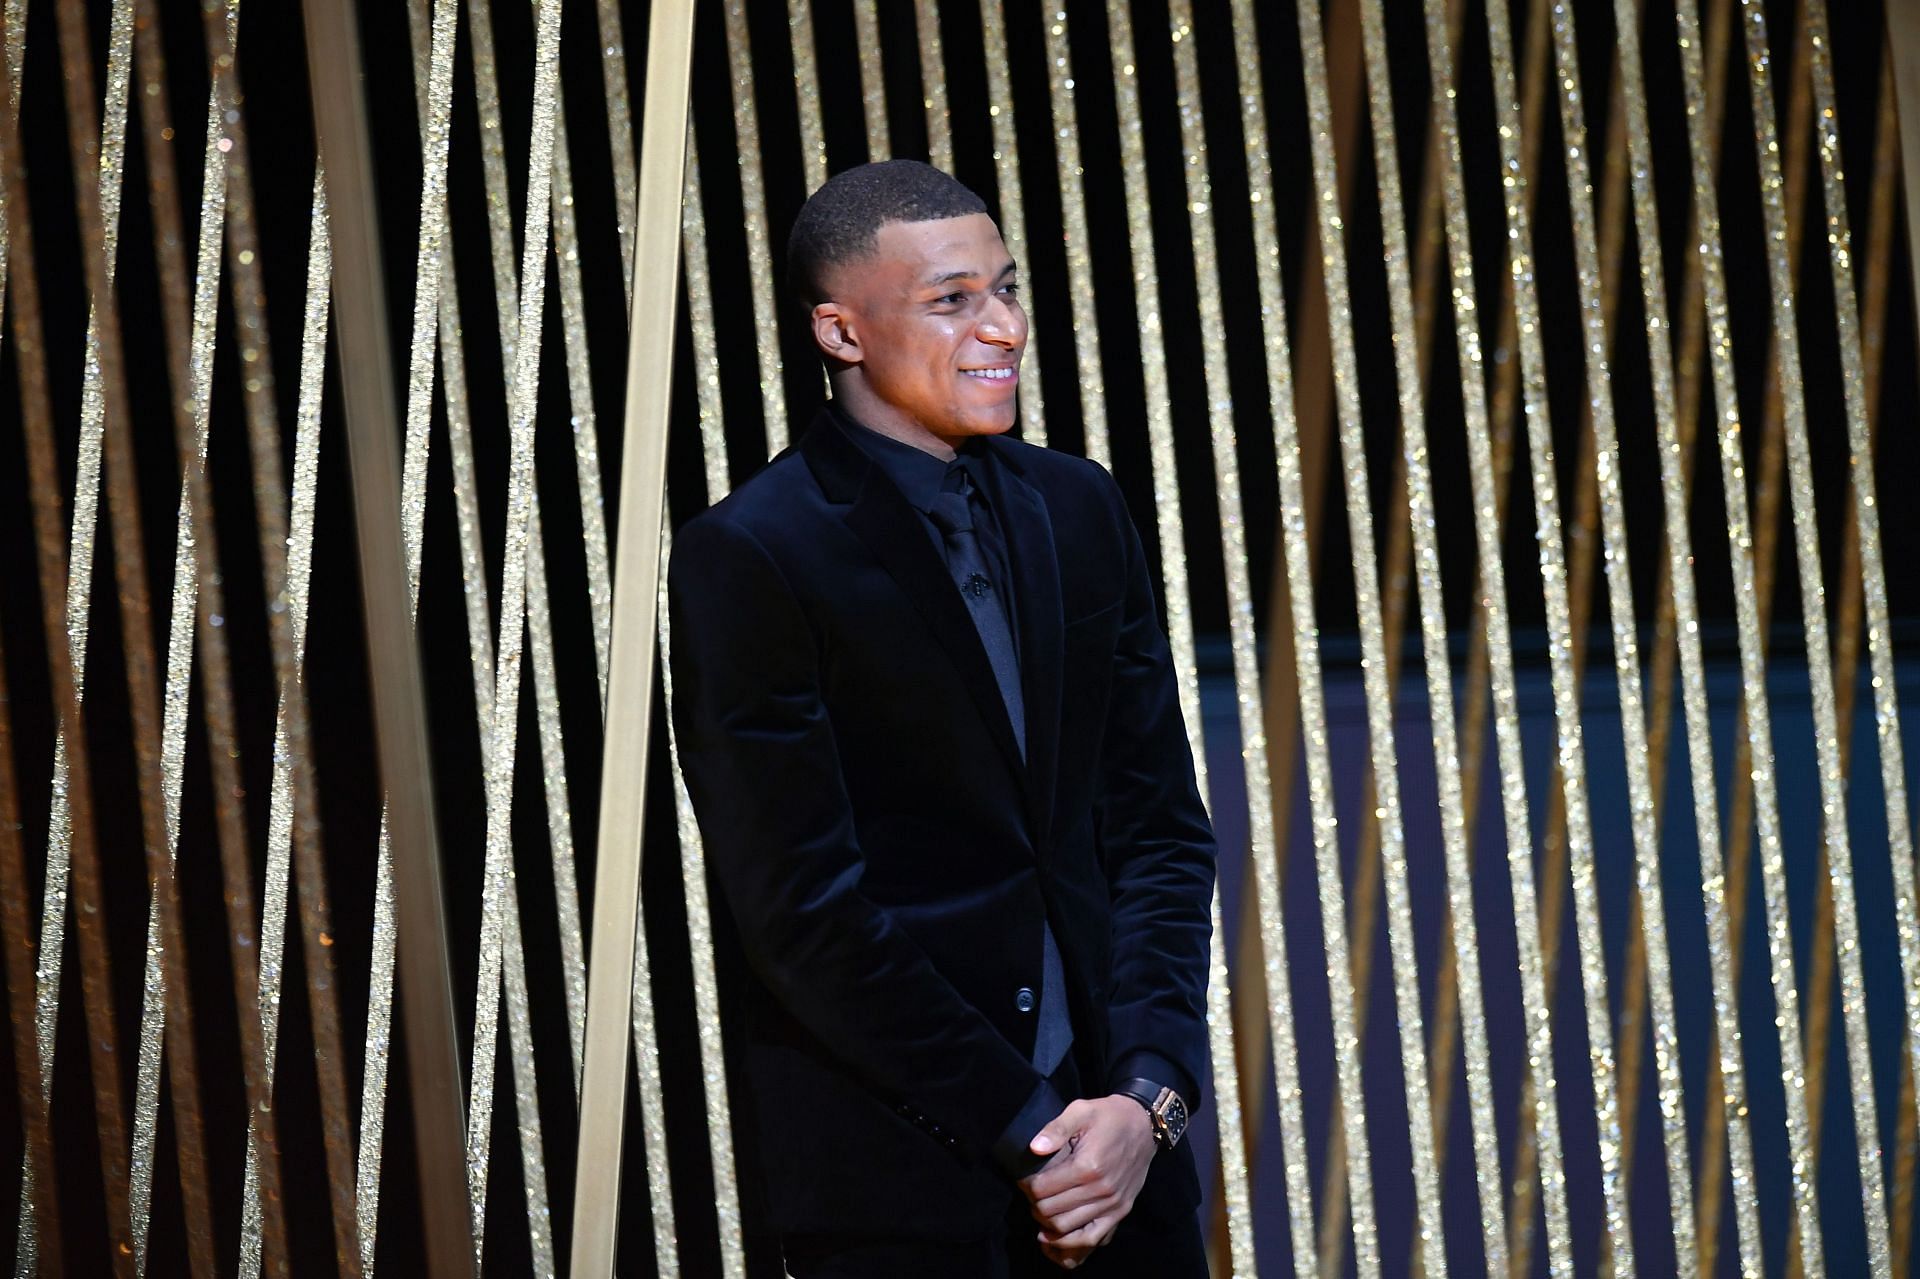 What next for Kylian Mbappe? Will he remain in Paris or move to Real Madrid?